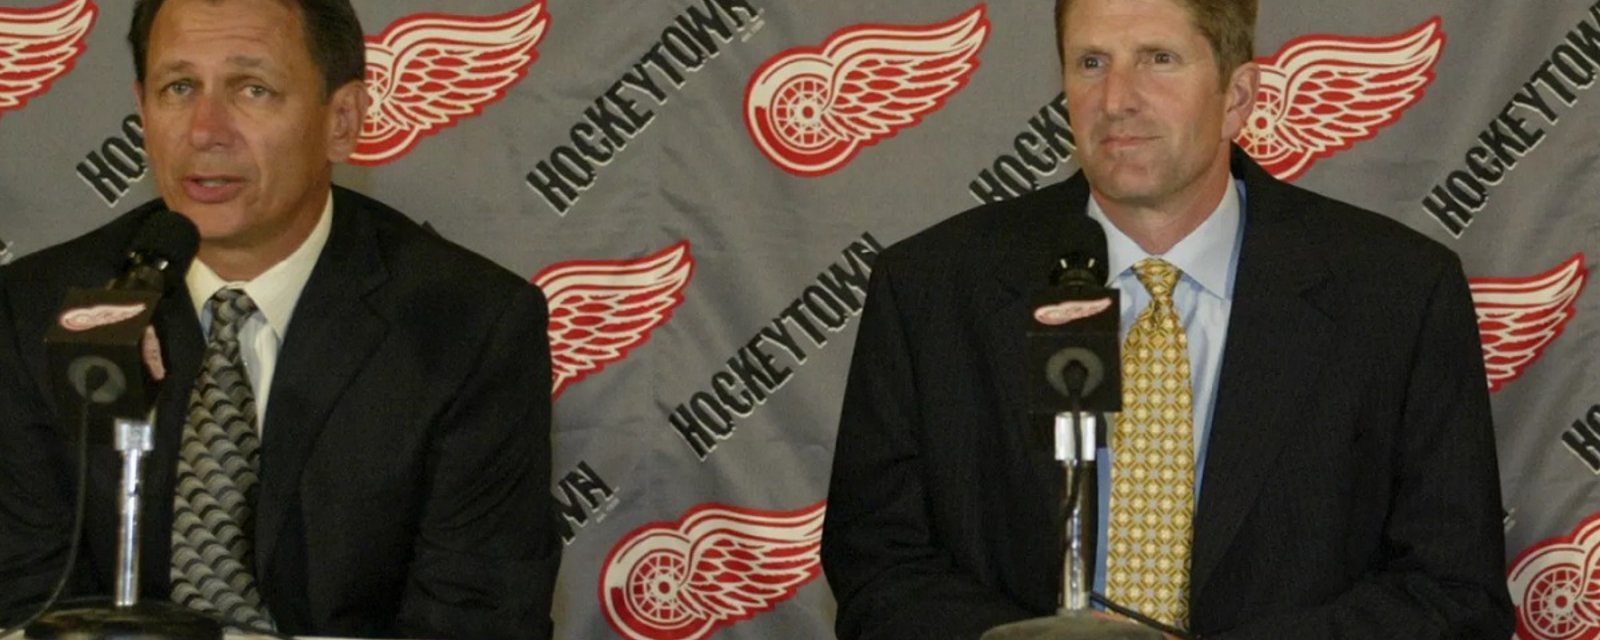 Two former Red Wings claim Ken Holland protected Mike Babcock despite complaints from players.